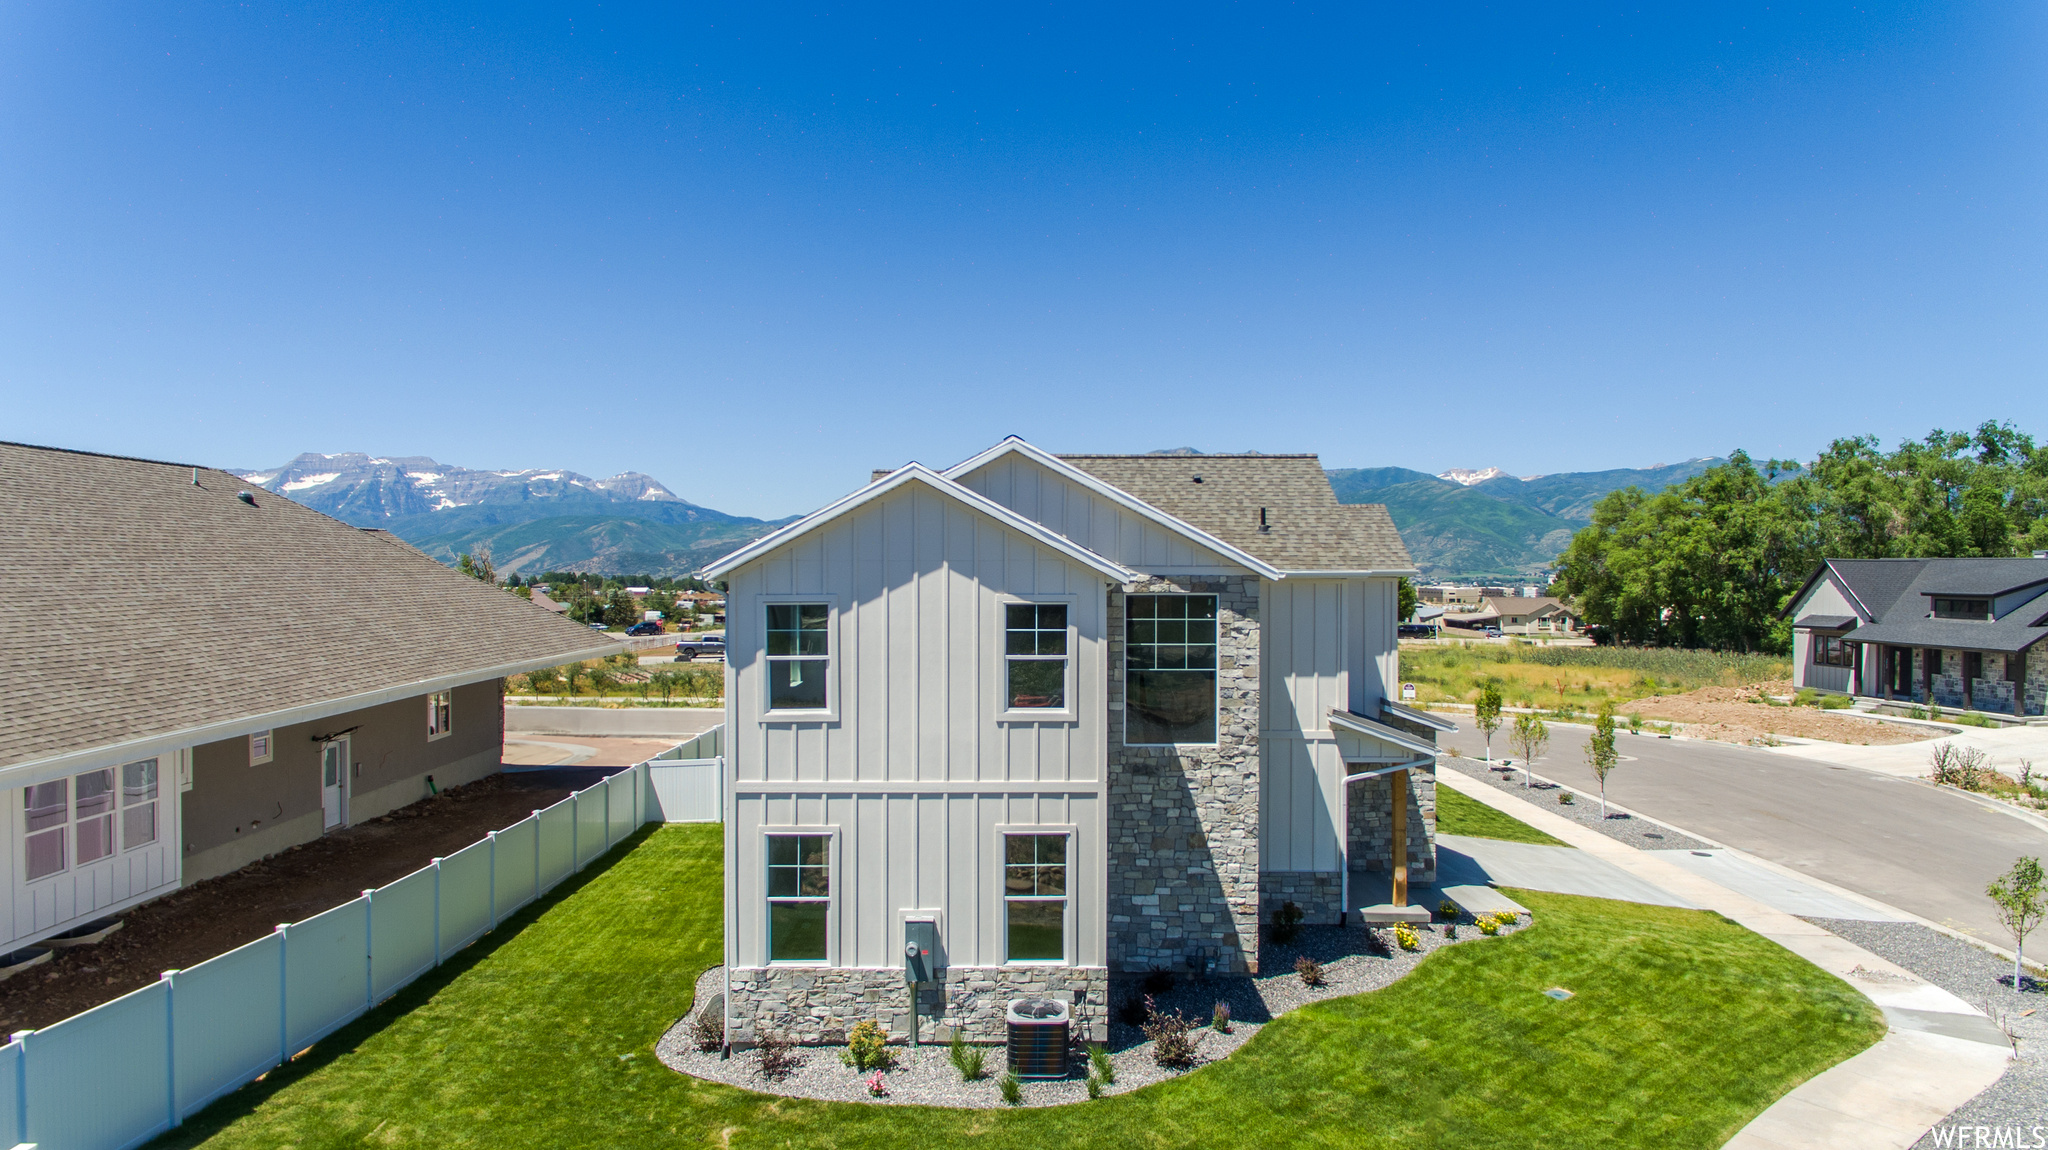 View of the side of the home featuring a mountain view, central AC, and a front lawn